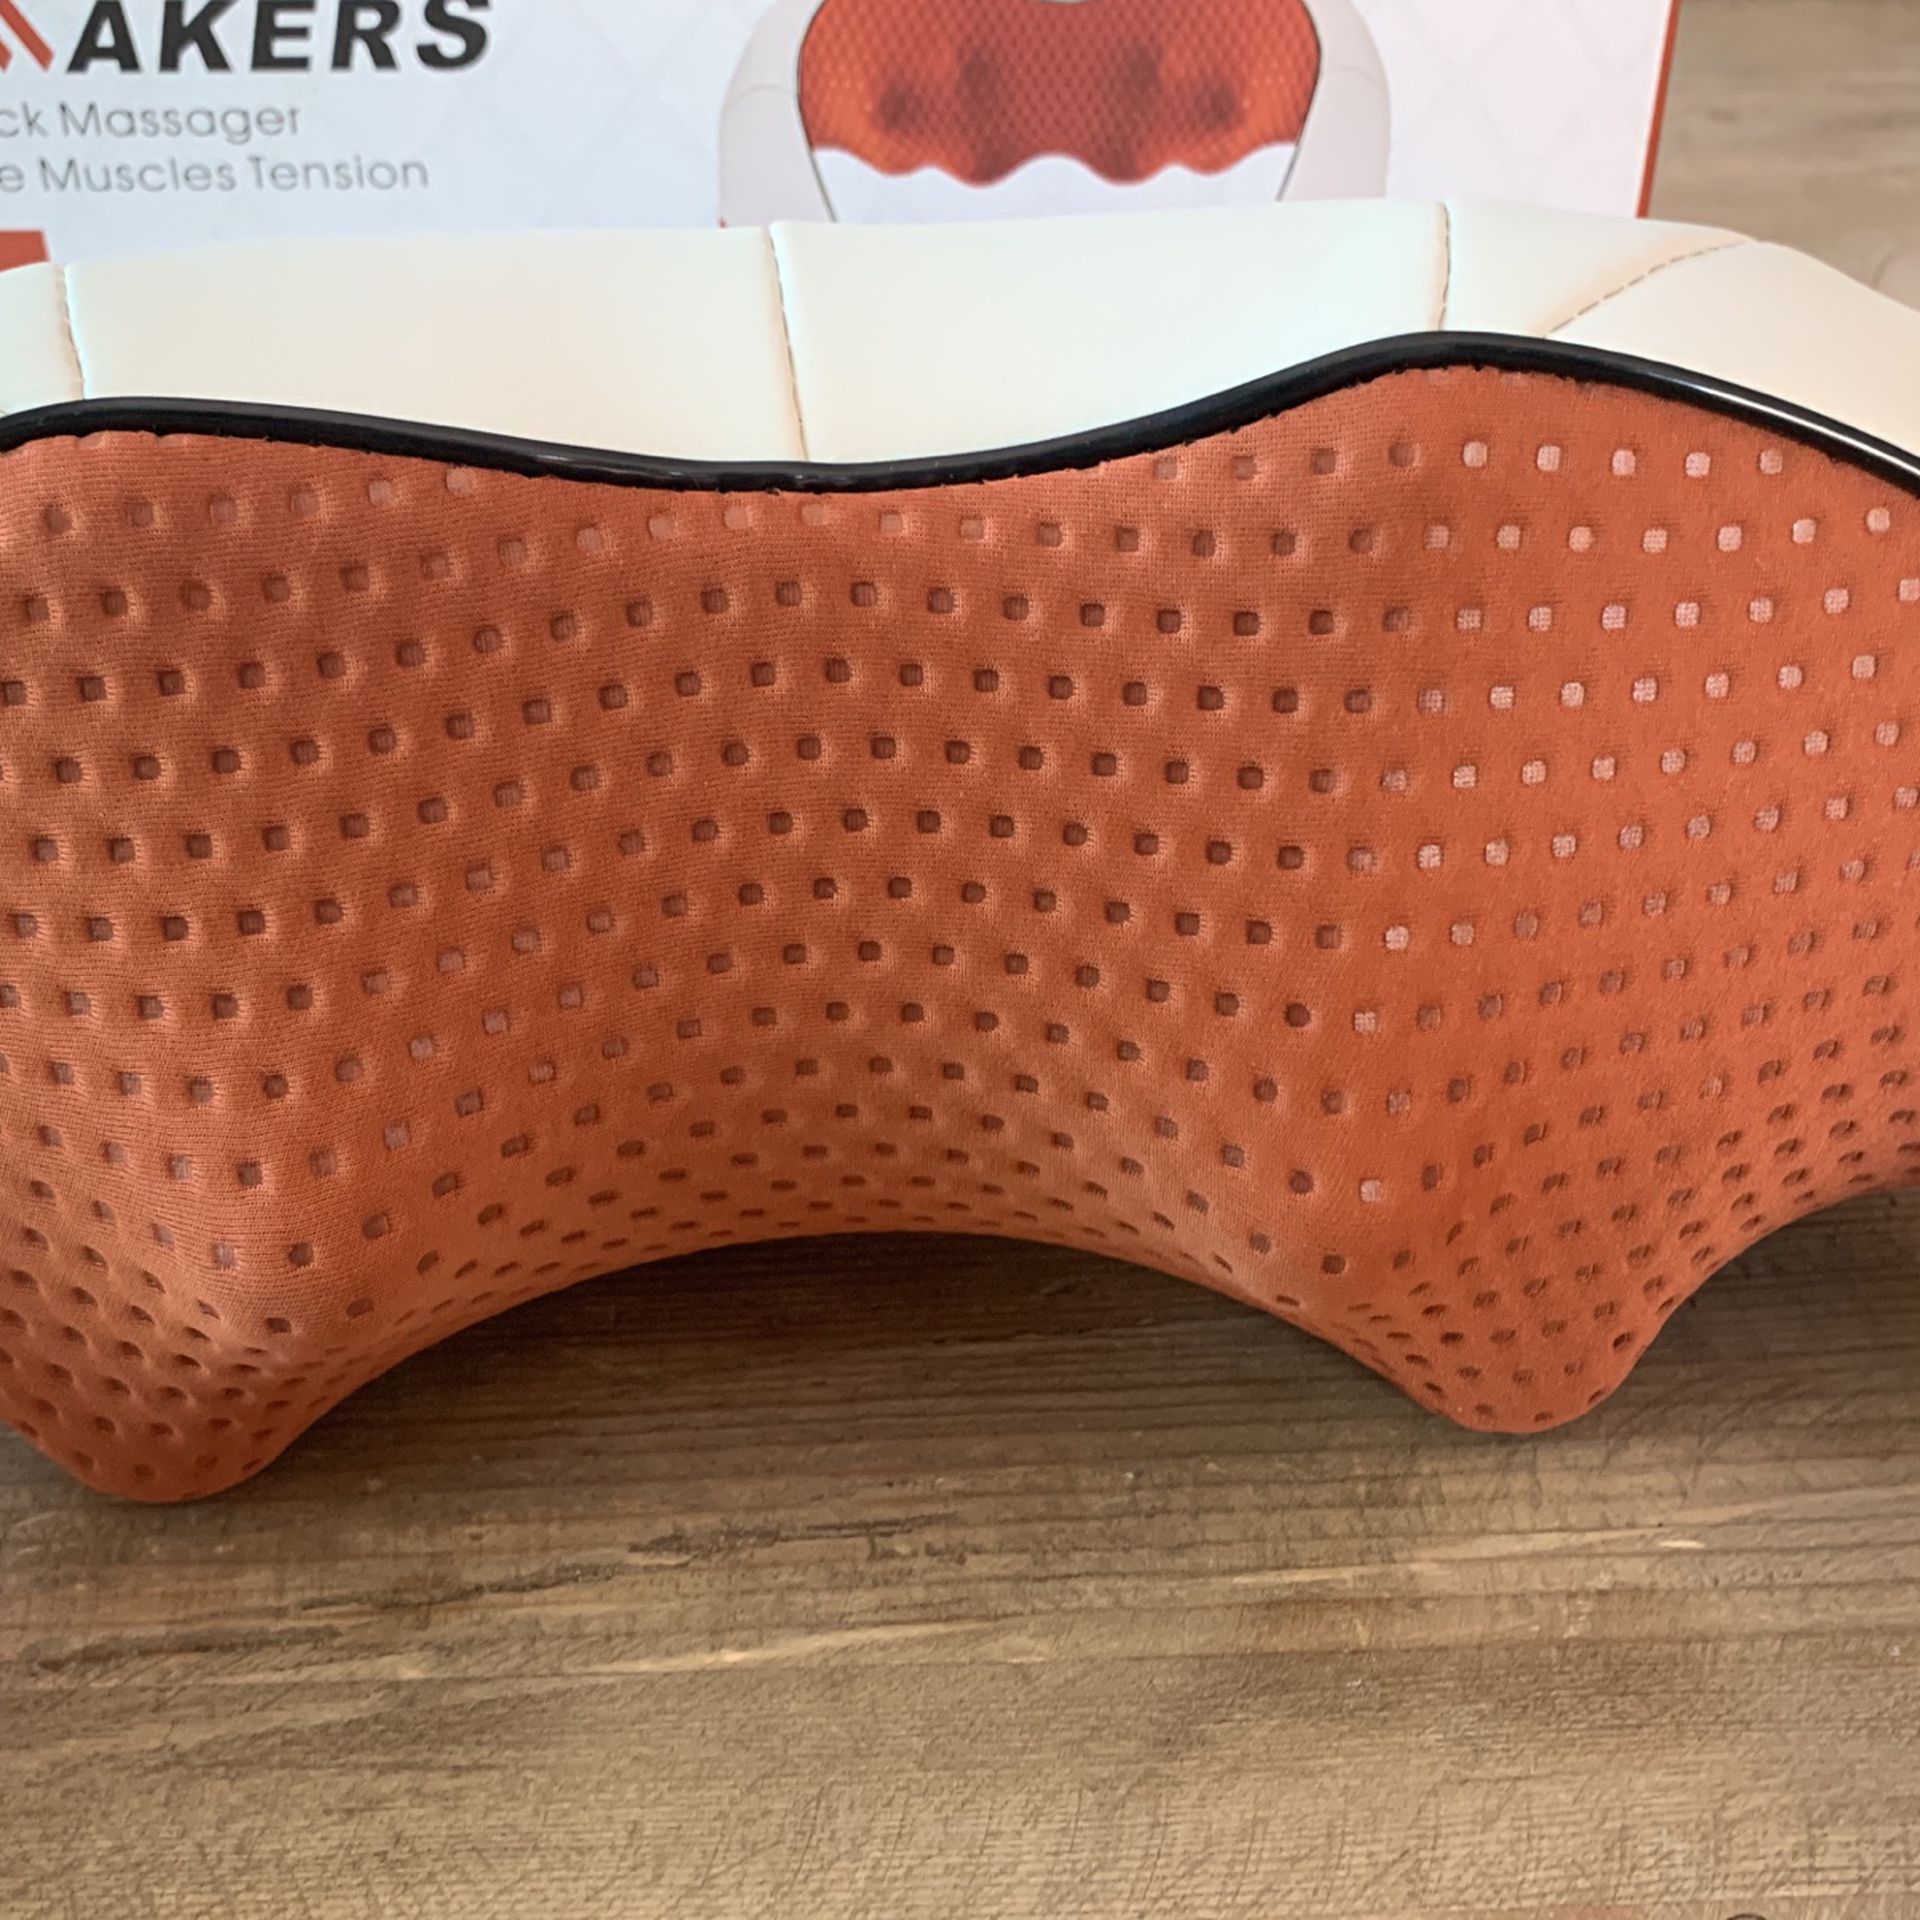 Popular MagicMakers Back and Neck Shiatsu Massager is 50% Off at